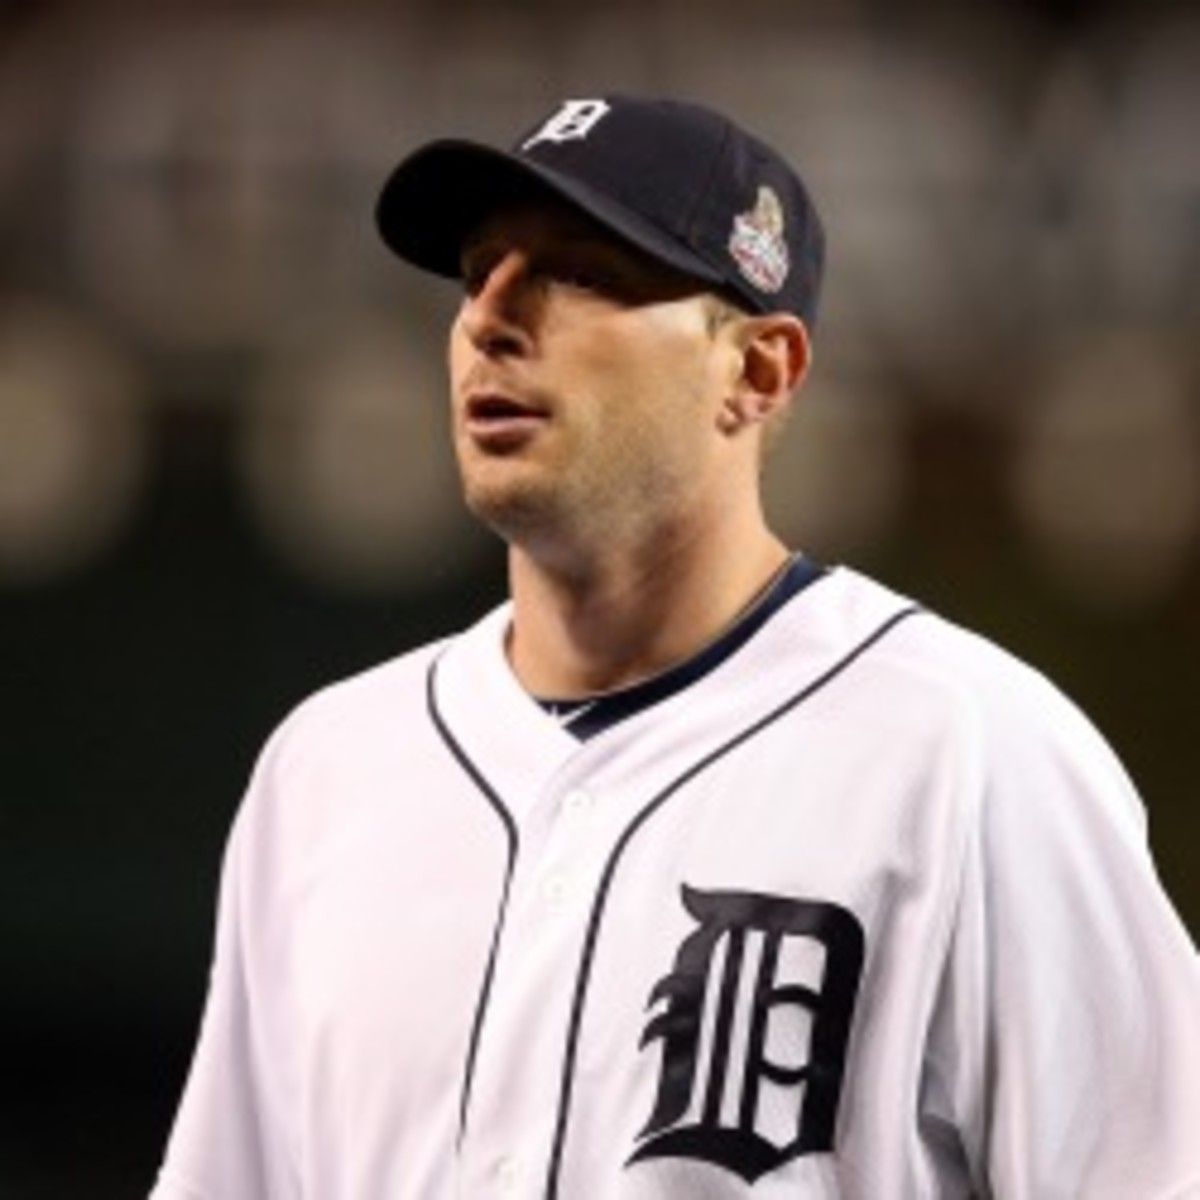 Tigers pitcher Max Scherzer agreed to a one-year deal worth $6.7 million. (Ezra Shaw/Getty Images)